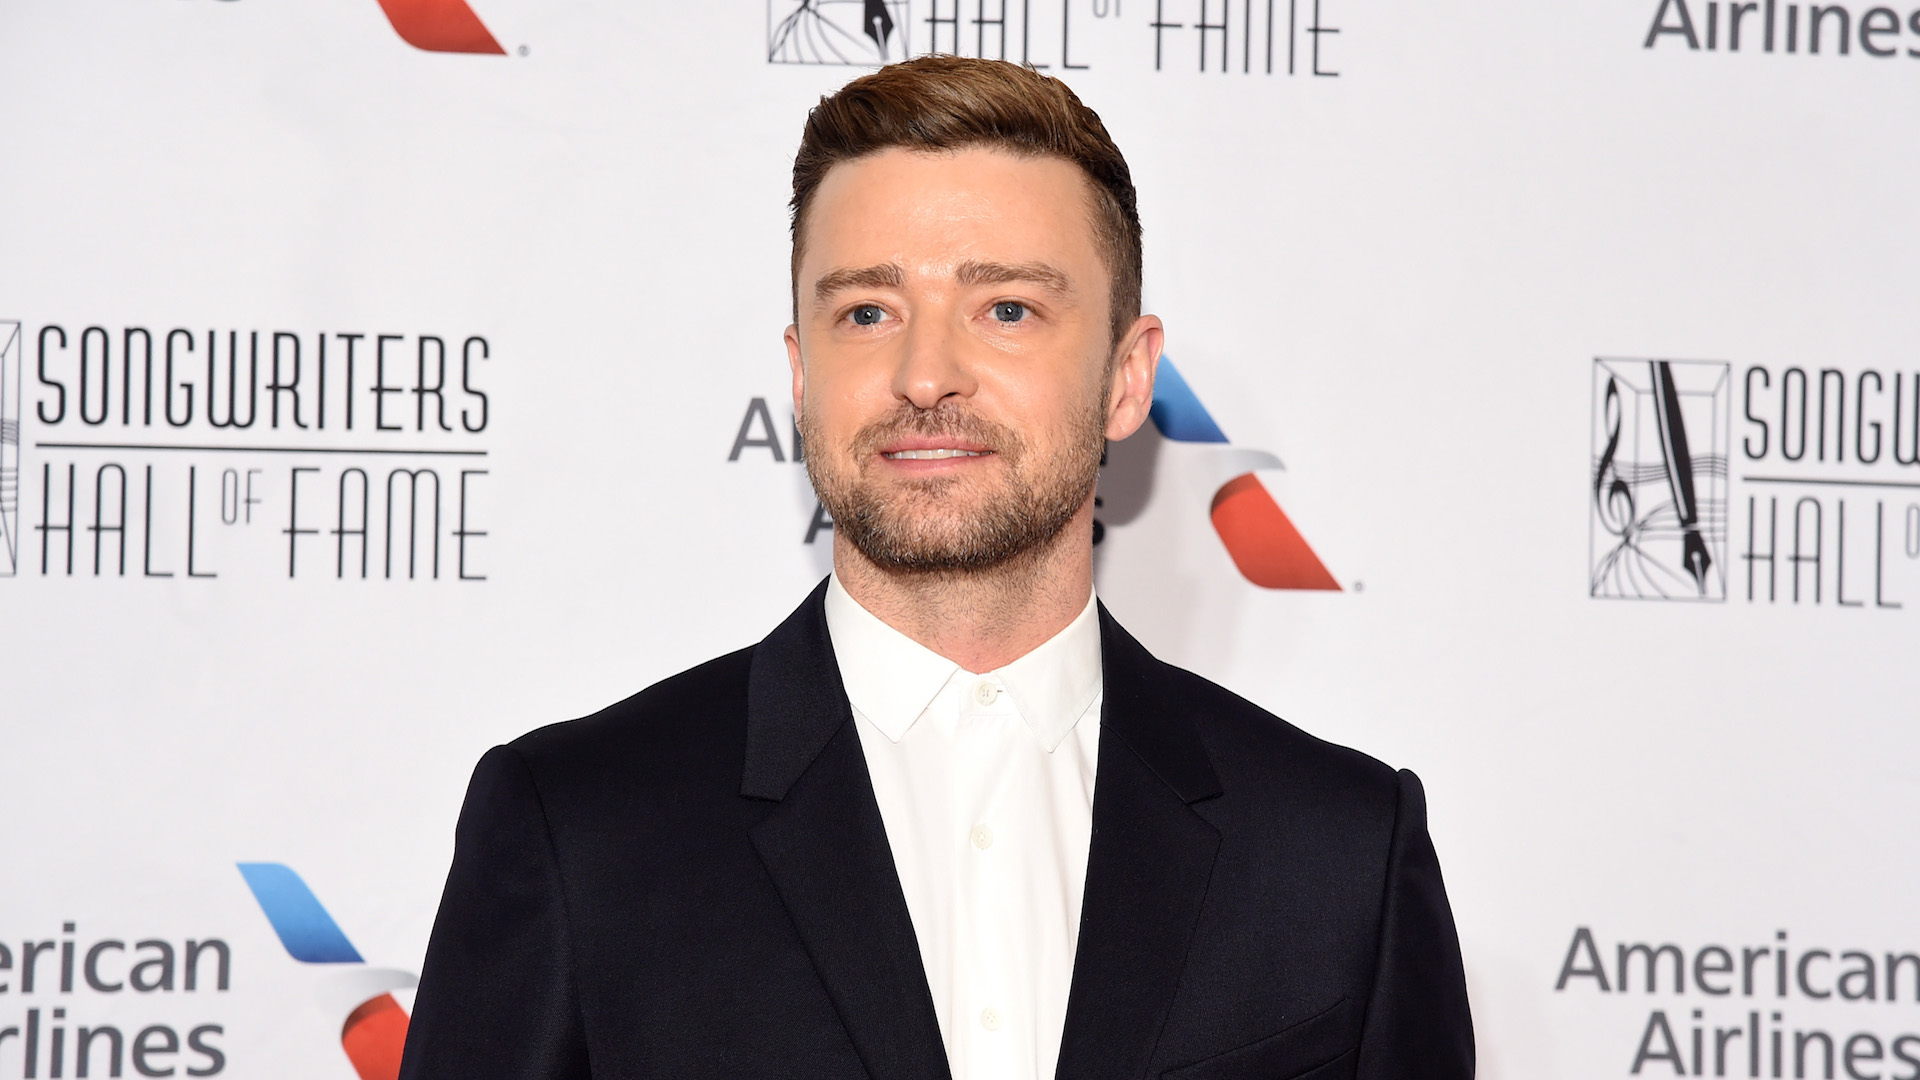 Justin Timberlake Reveals New Album is in the Works